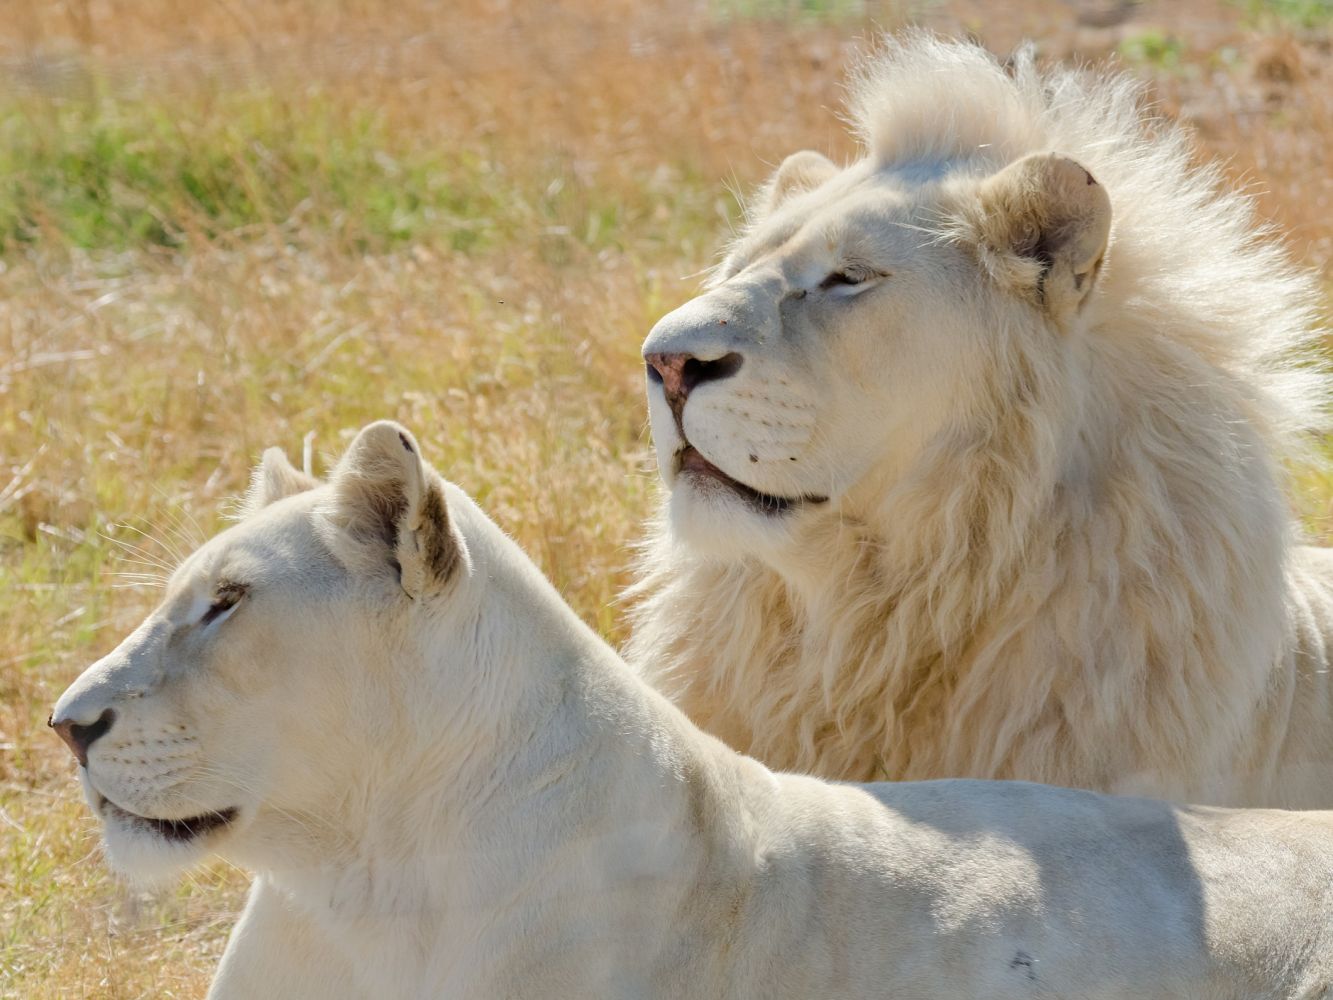 What are 5 interesting facts about white lions?